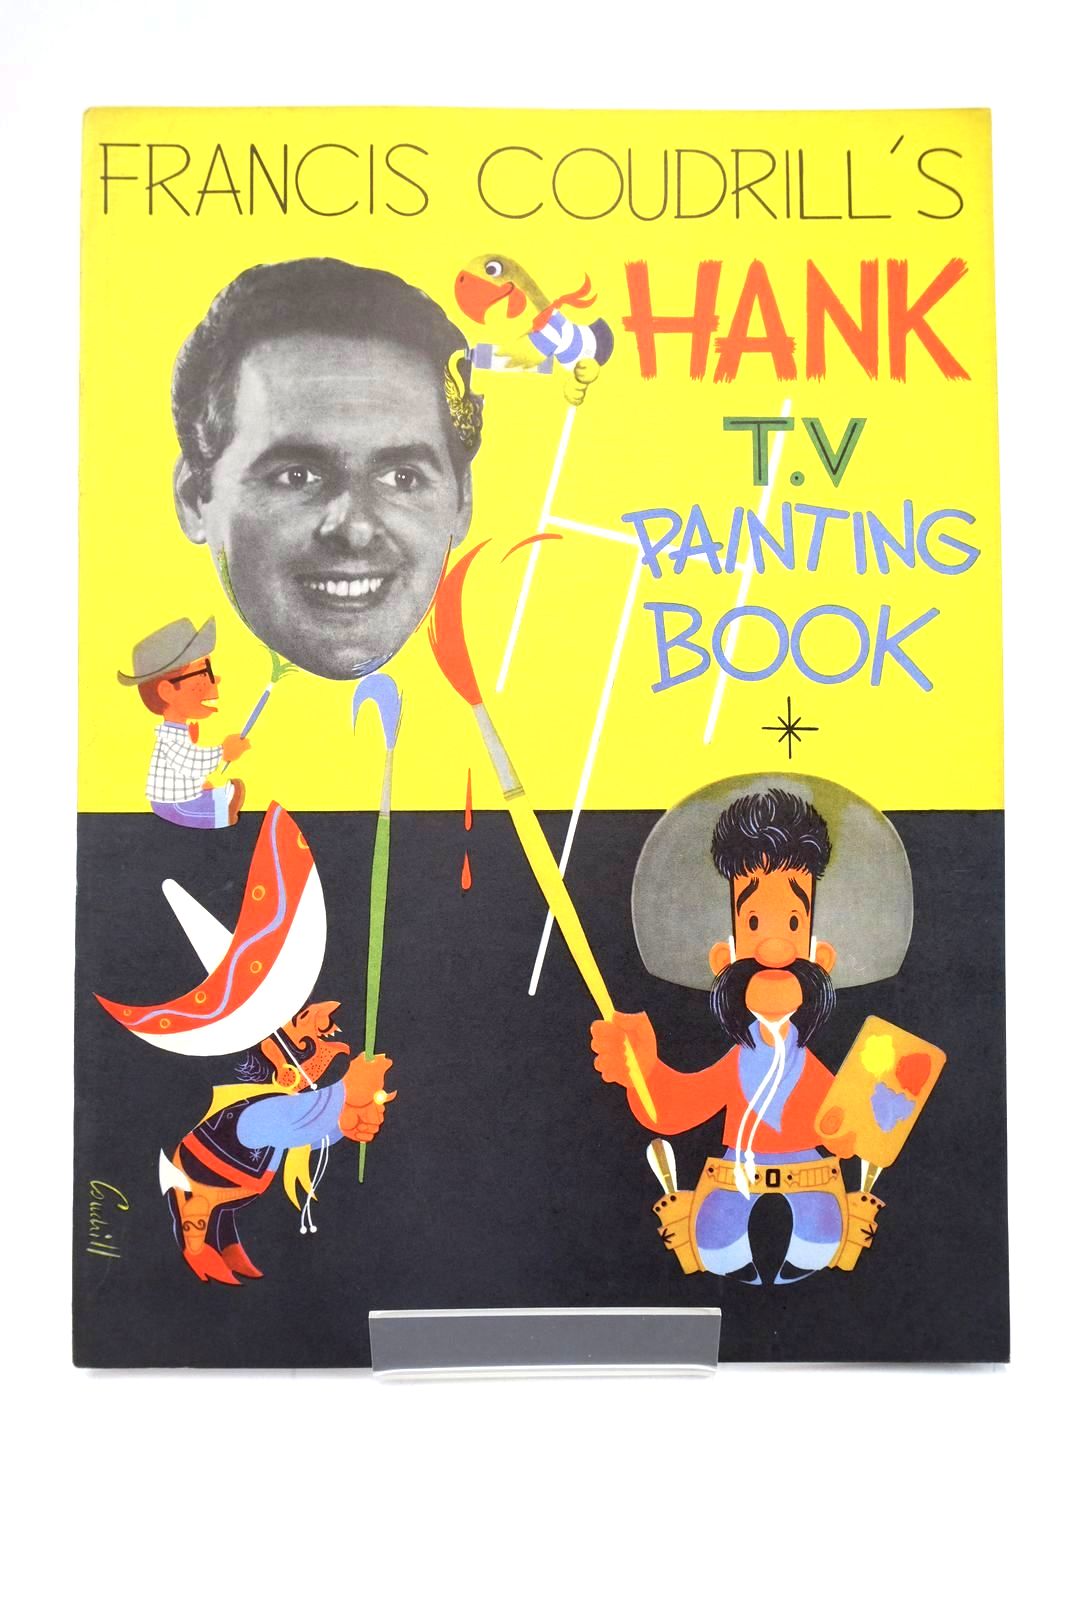 Photo of FRANCIS COUDRILL'S HANK T.V PAINTING BOOK- Stock Number: 1325007